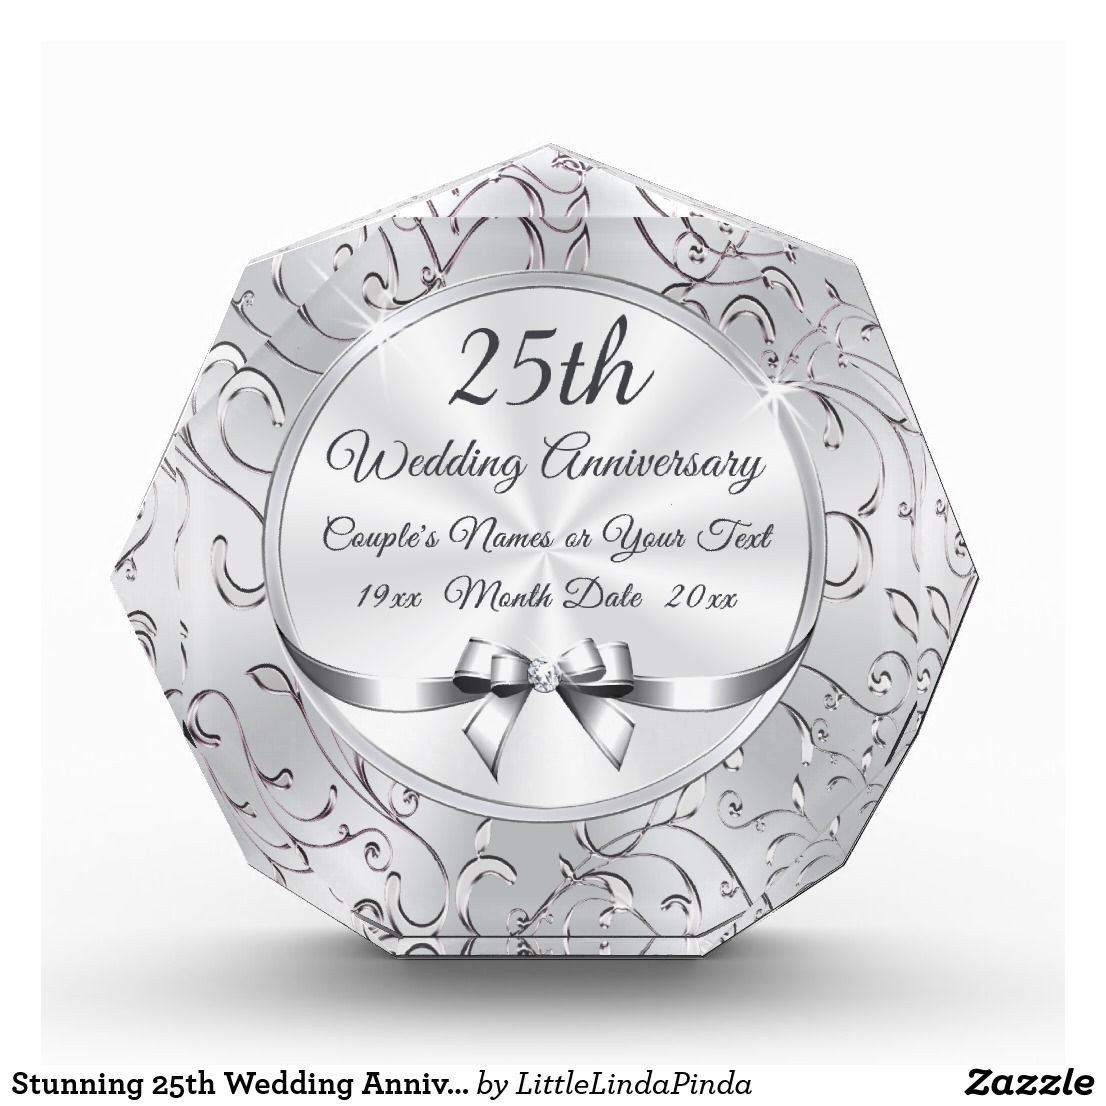 Wedding Anniversary Gift Ideas For Couples
 Top 20 25th Wedding Anniversary Gift Ideas for Couples